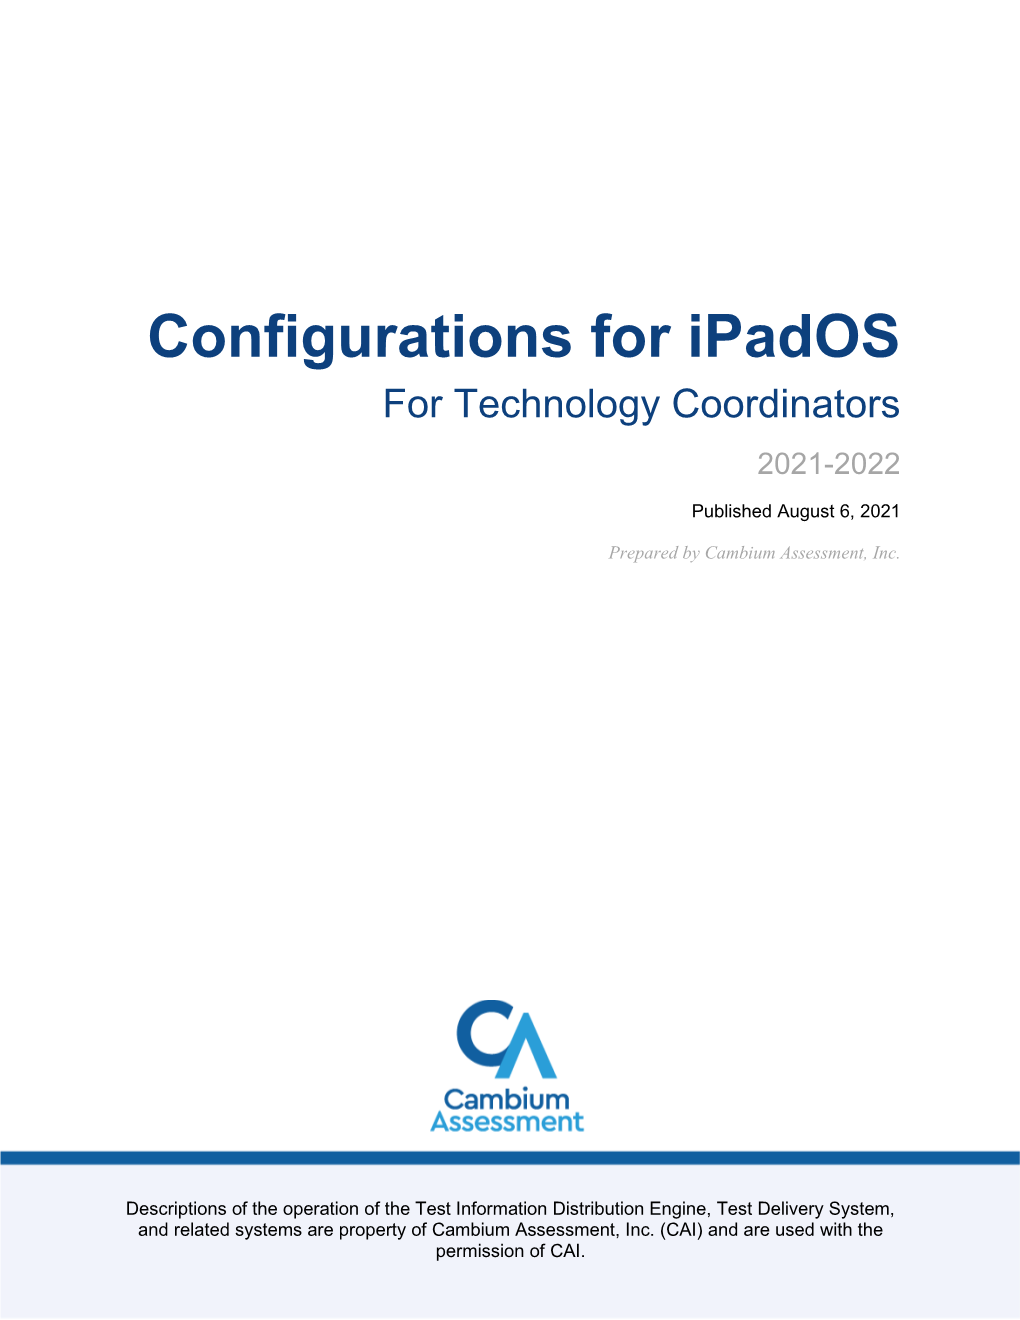 Configurations for Ipados for Technology Coordinators 2021-2022